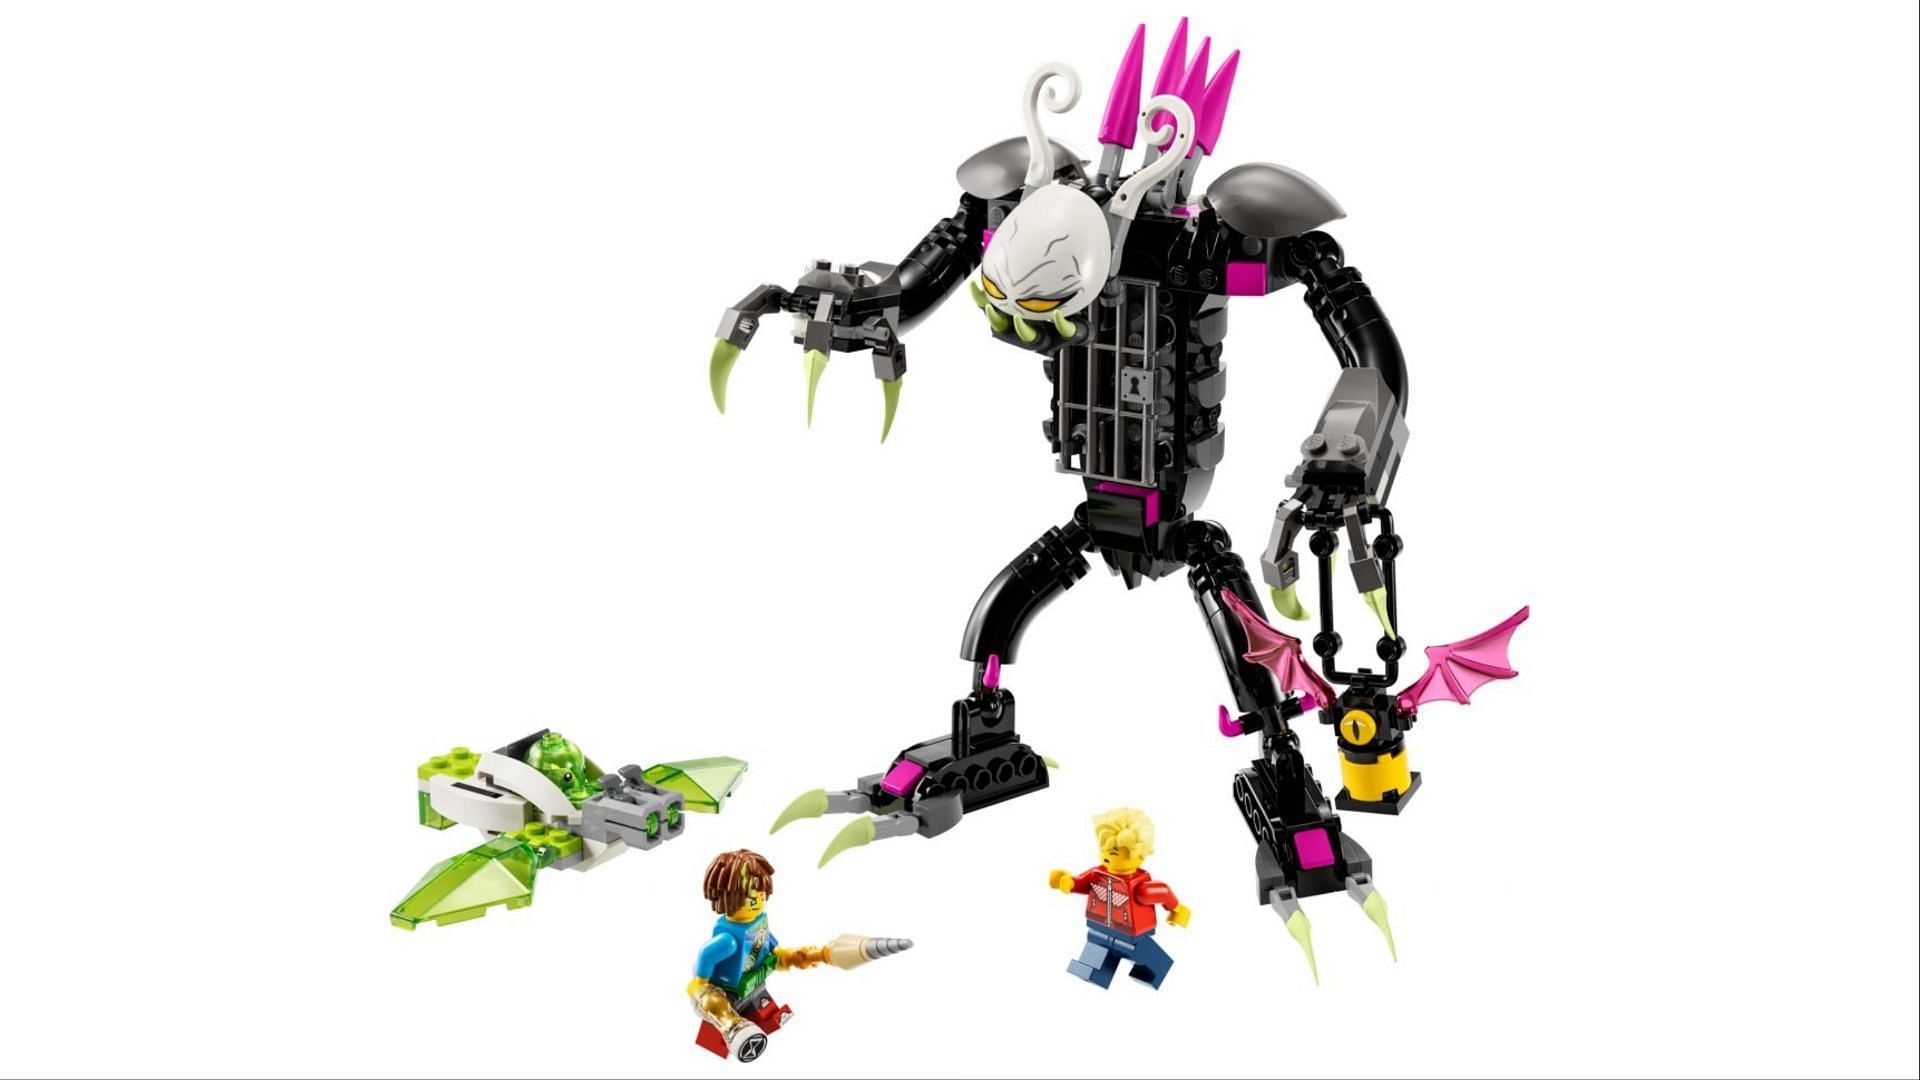 DREAMZzz Grimkeeper the Cage Monster (Image via LEGO)